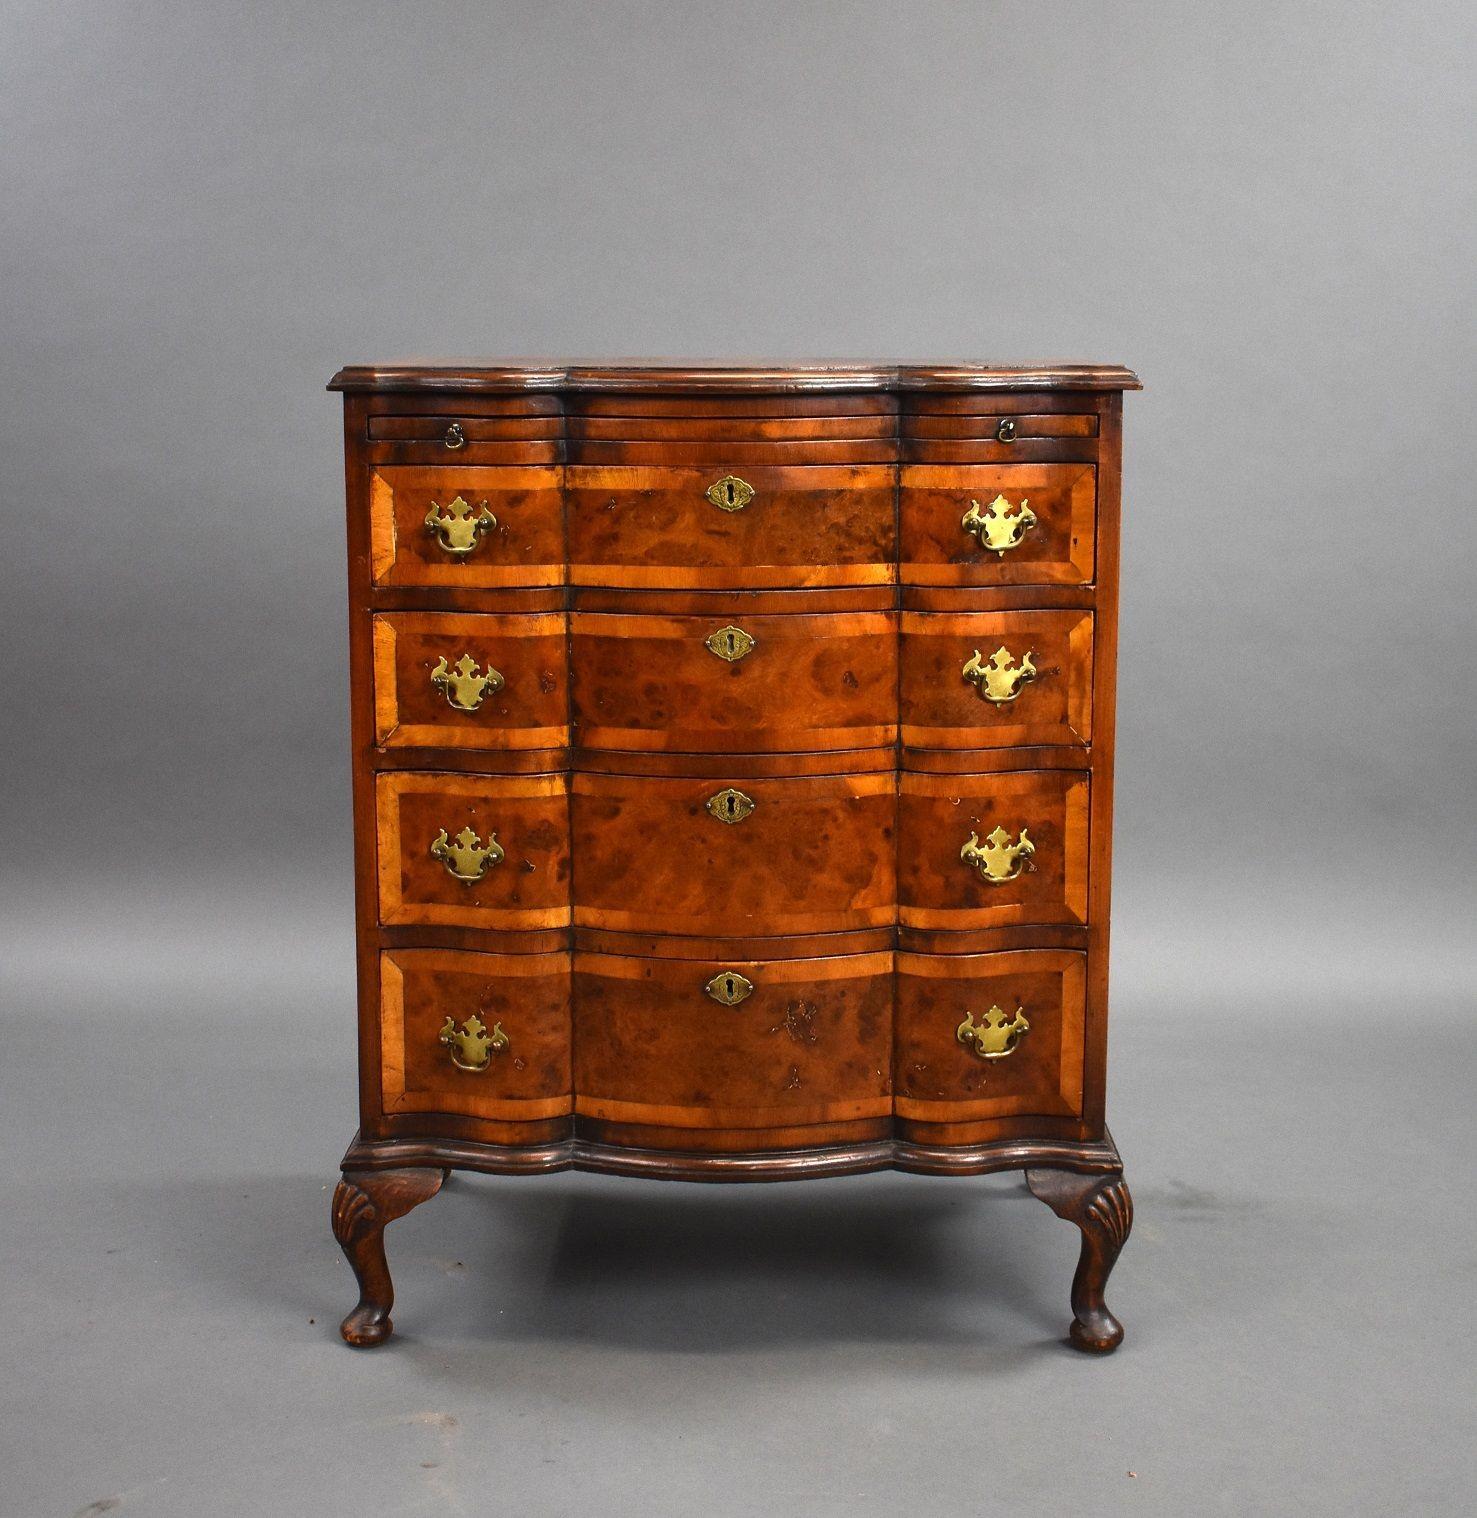 19th Century Burr Walut batchelors chest drawers in good condition with writing slide above four drawers with brass handles and escucheons, all drawers are oak lined and stands on small elegant cabriole legs